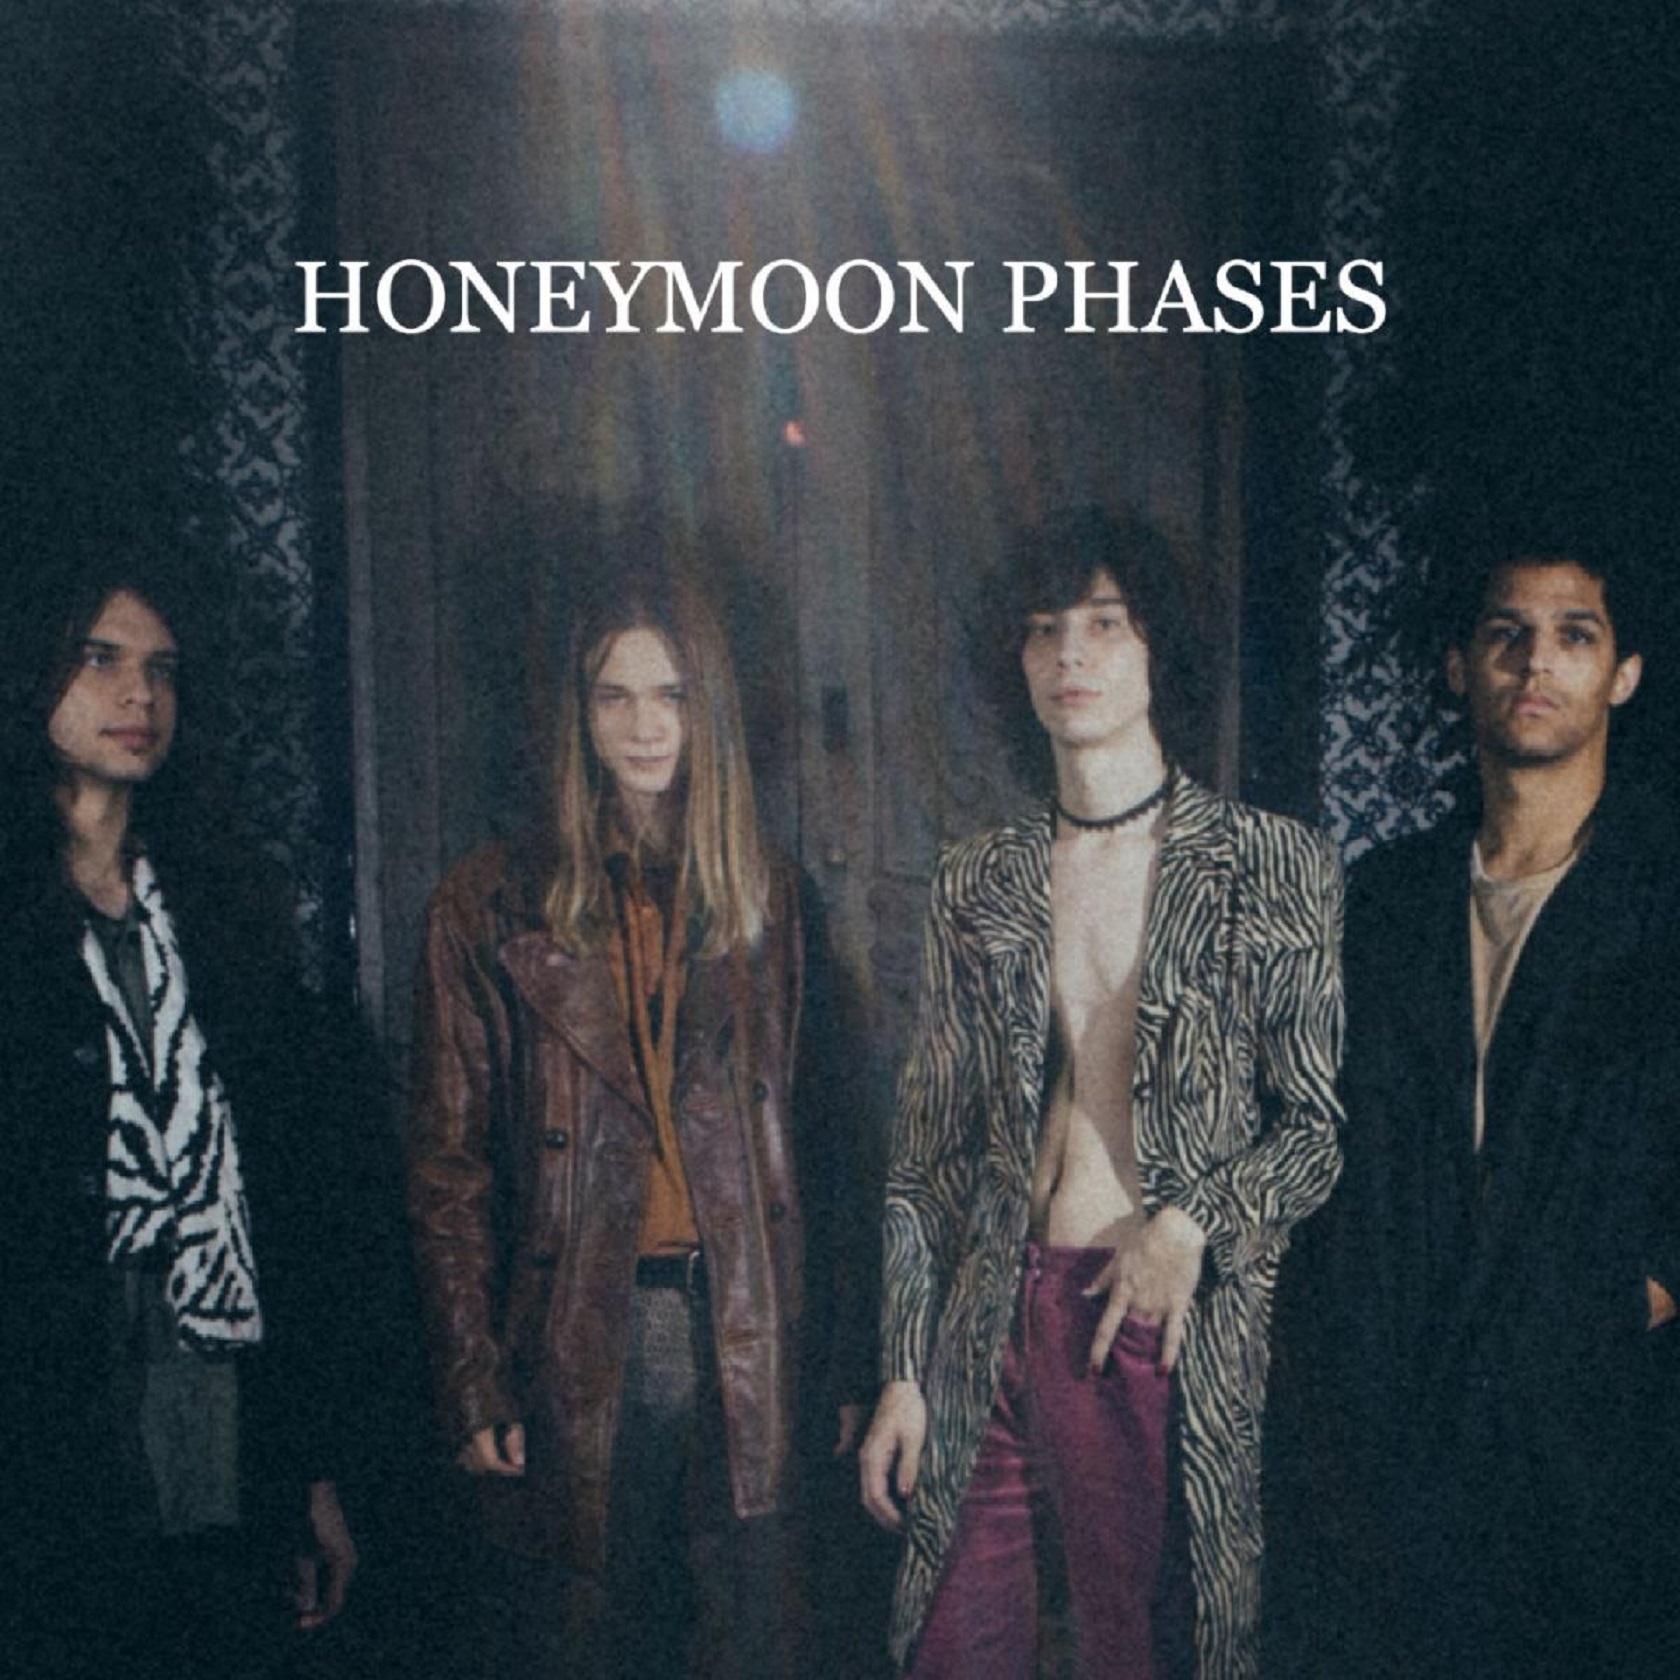 The Cuckoos Release New EP, Honeymoon Phases